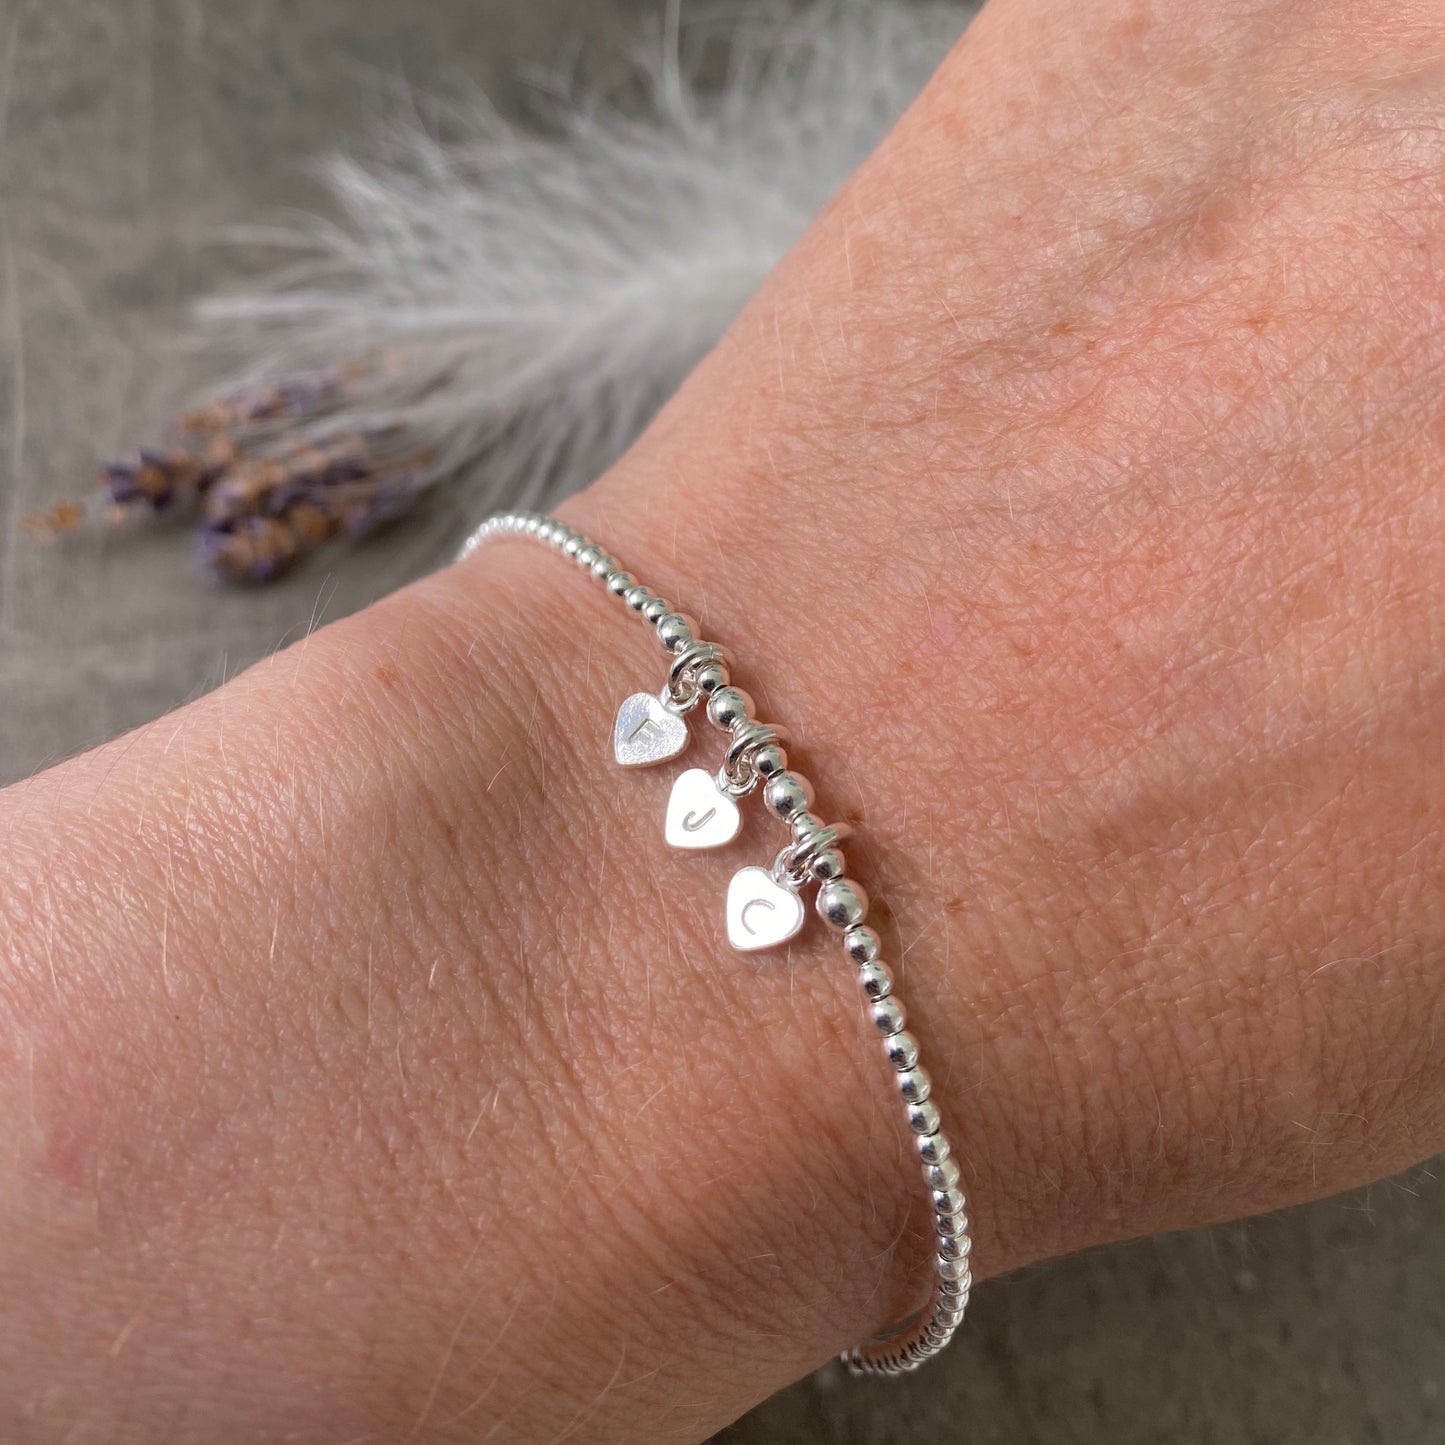 Dainty Personalised Bracelet with Family Initials in Sterling Silver